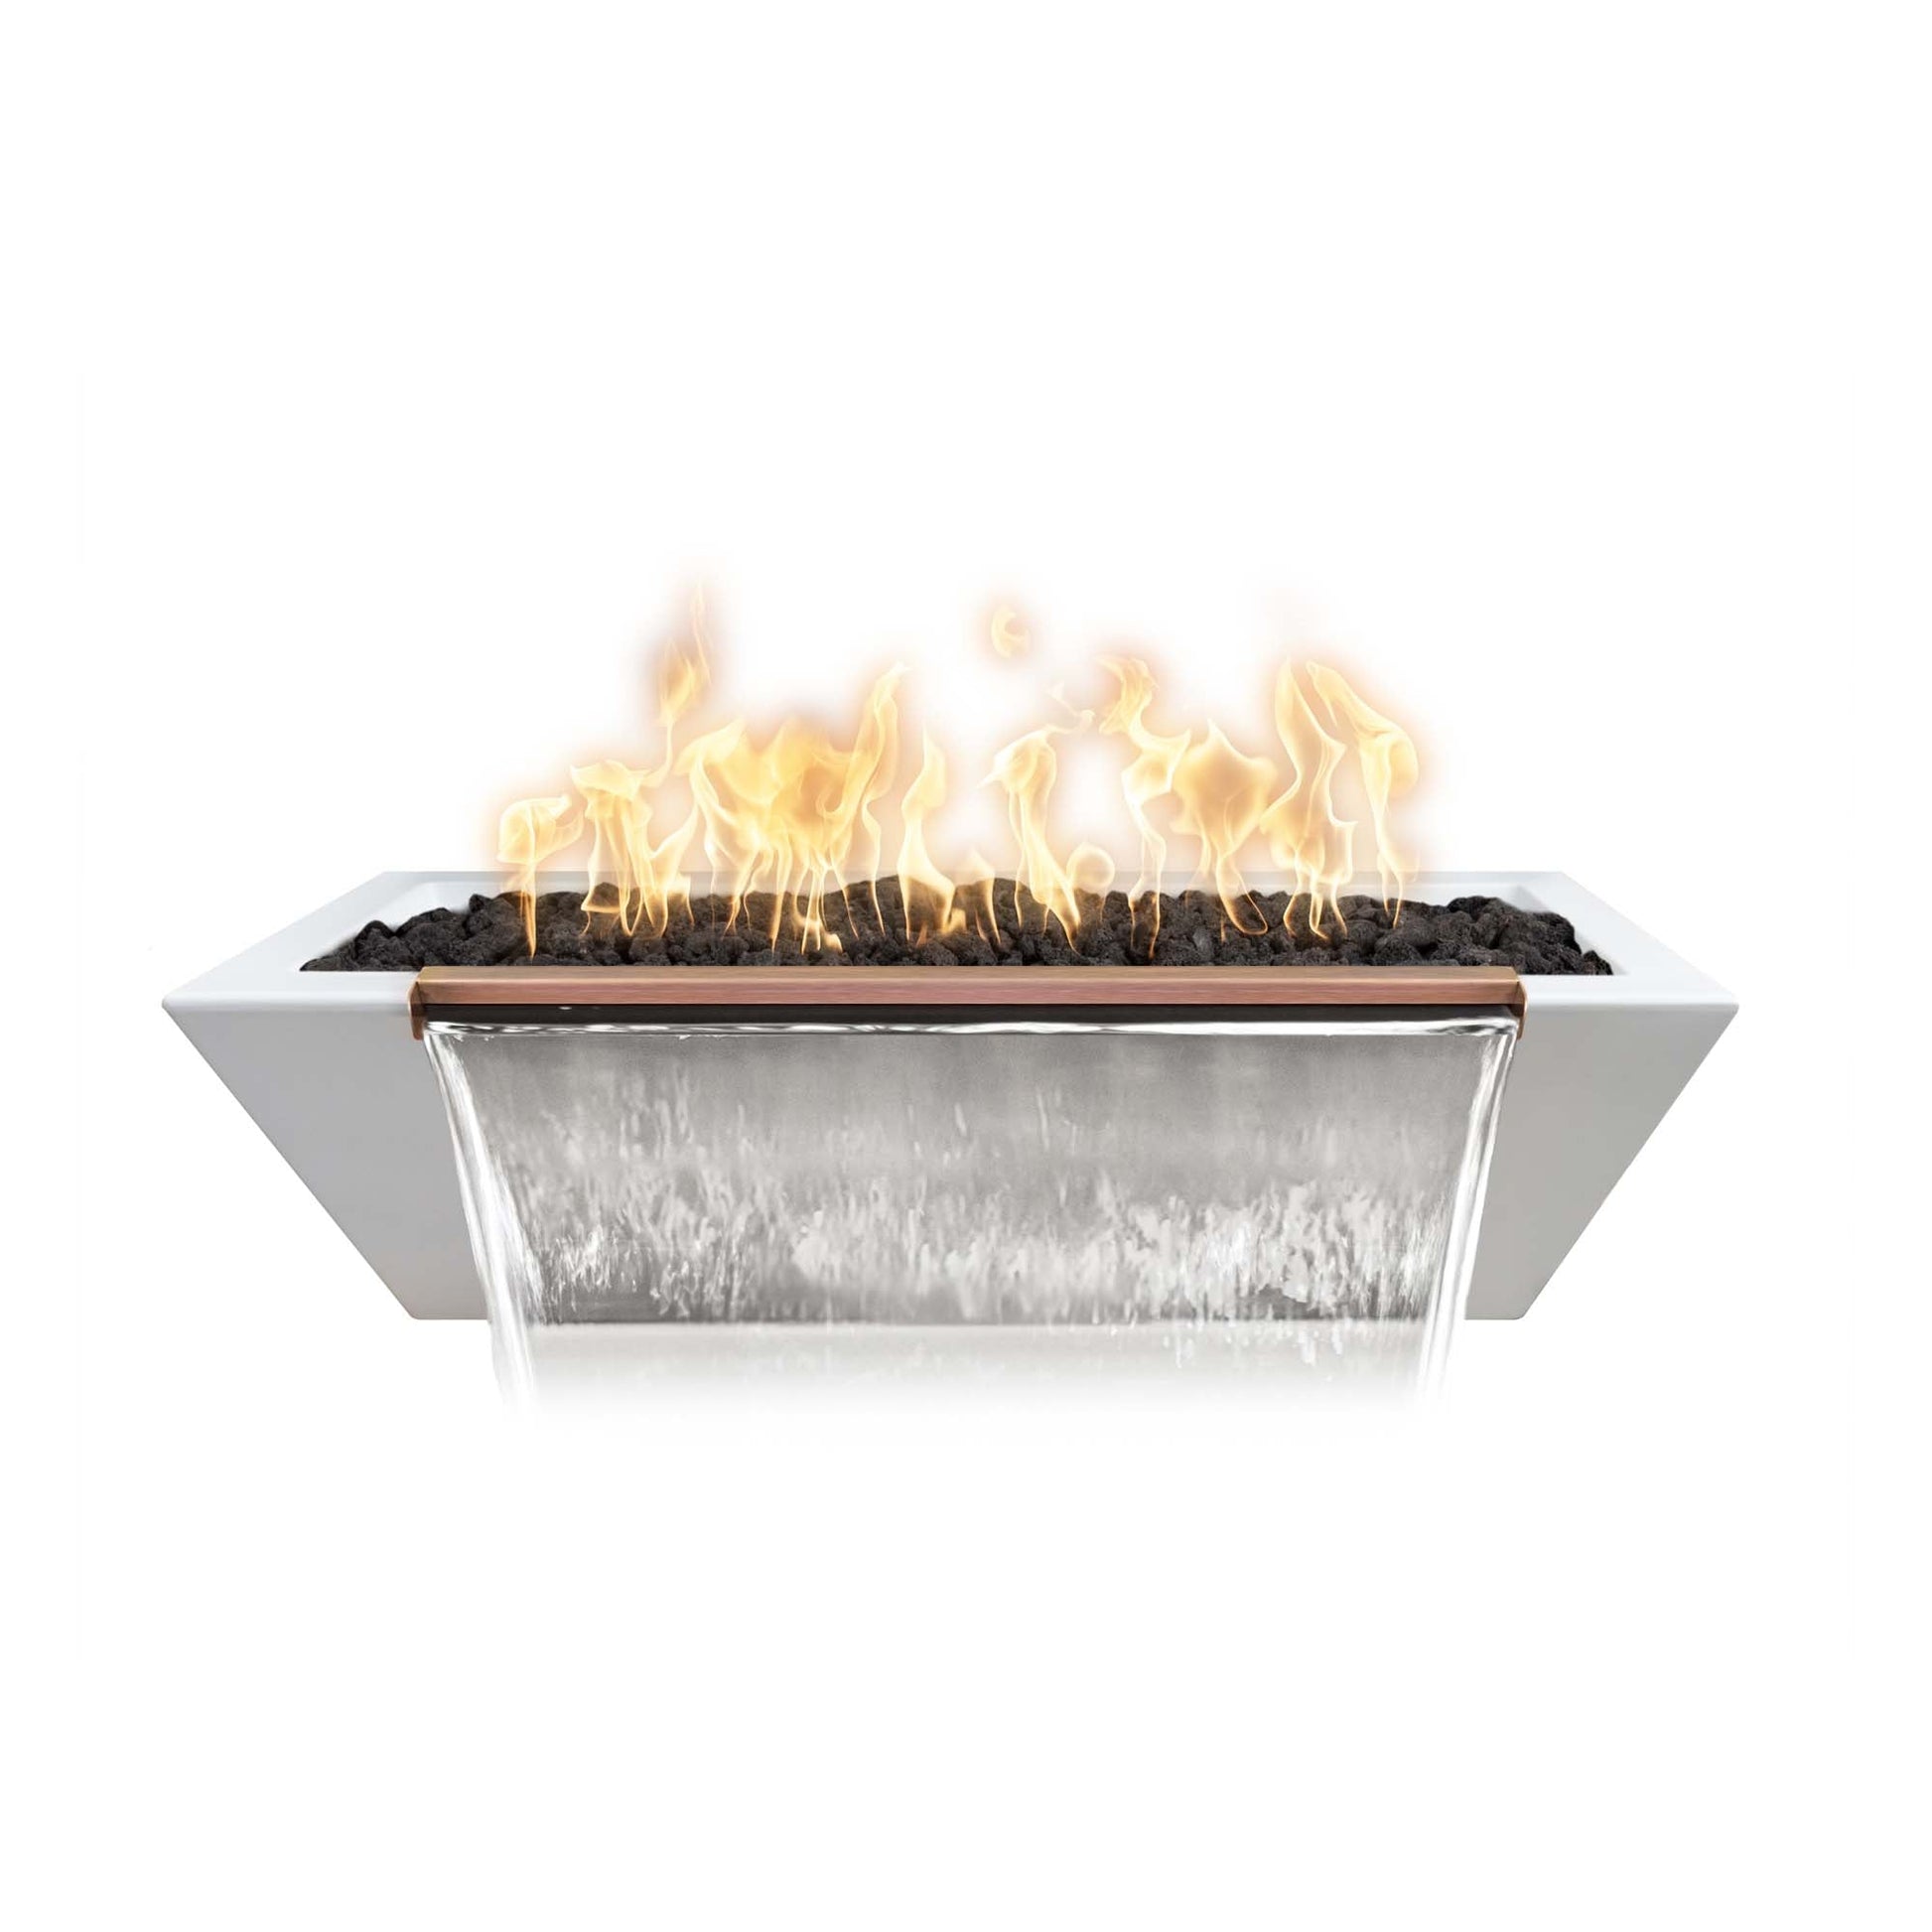 The Outdoor Plus Linear Maya 48" Rustic Coffee GFRC Concrete Liquid Propane Fire & Water Bowl with Match Lit with Flame Sense Ignition